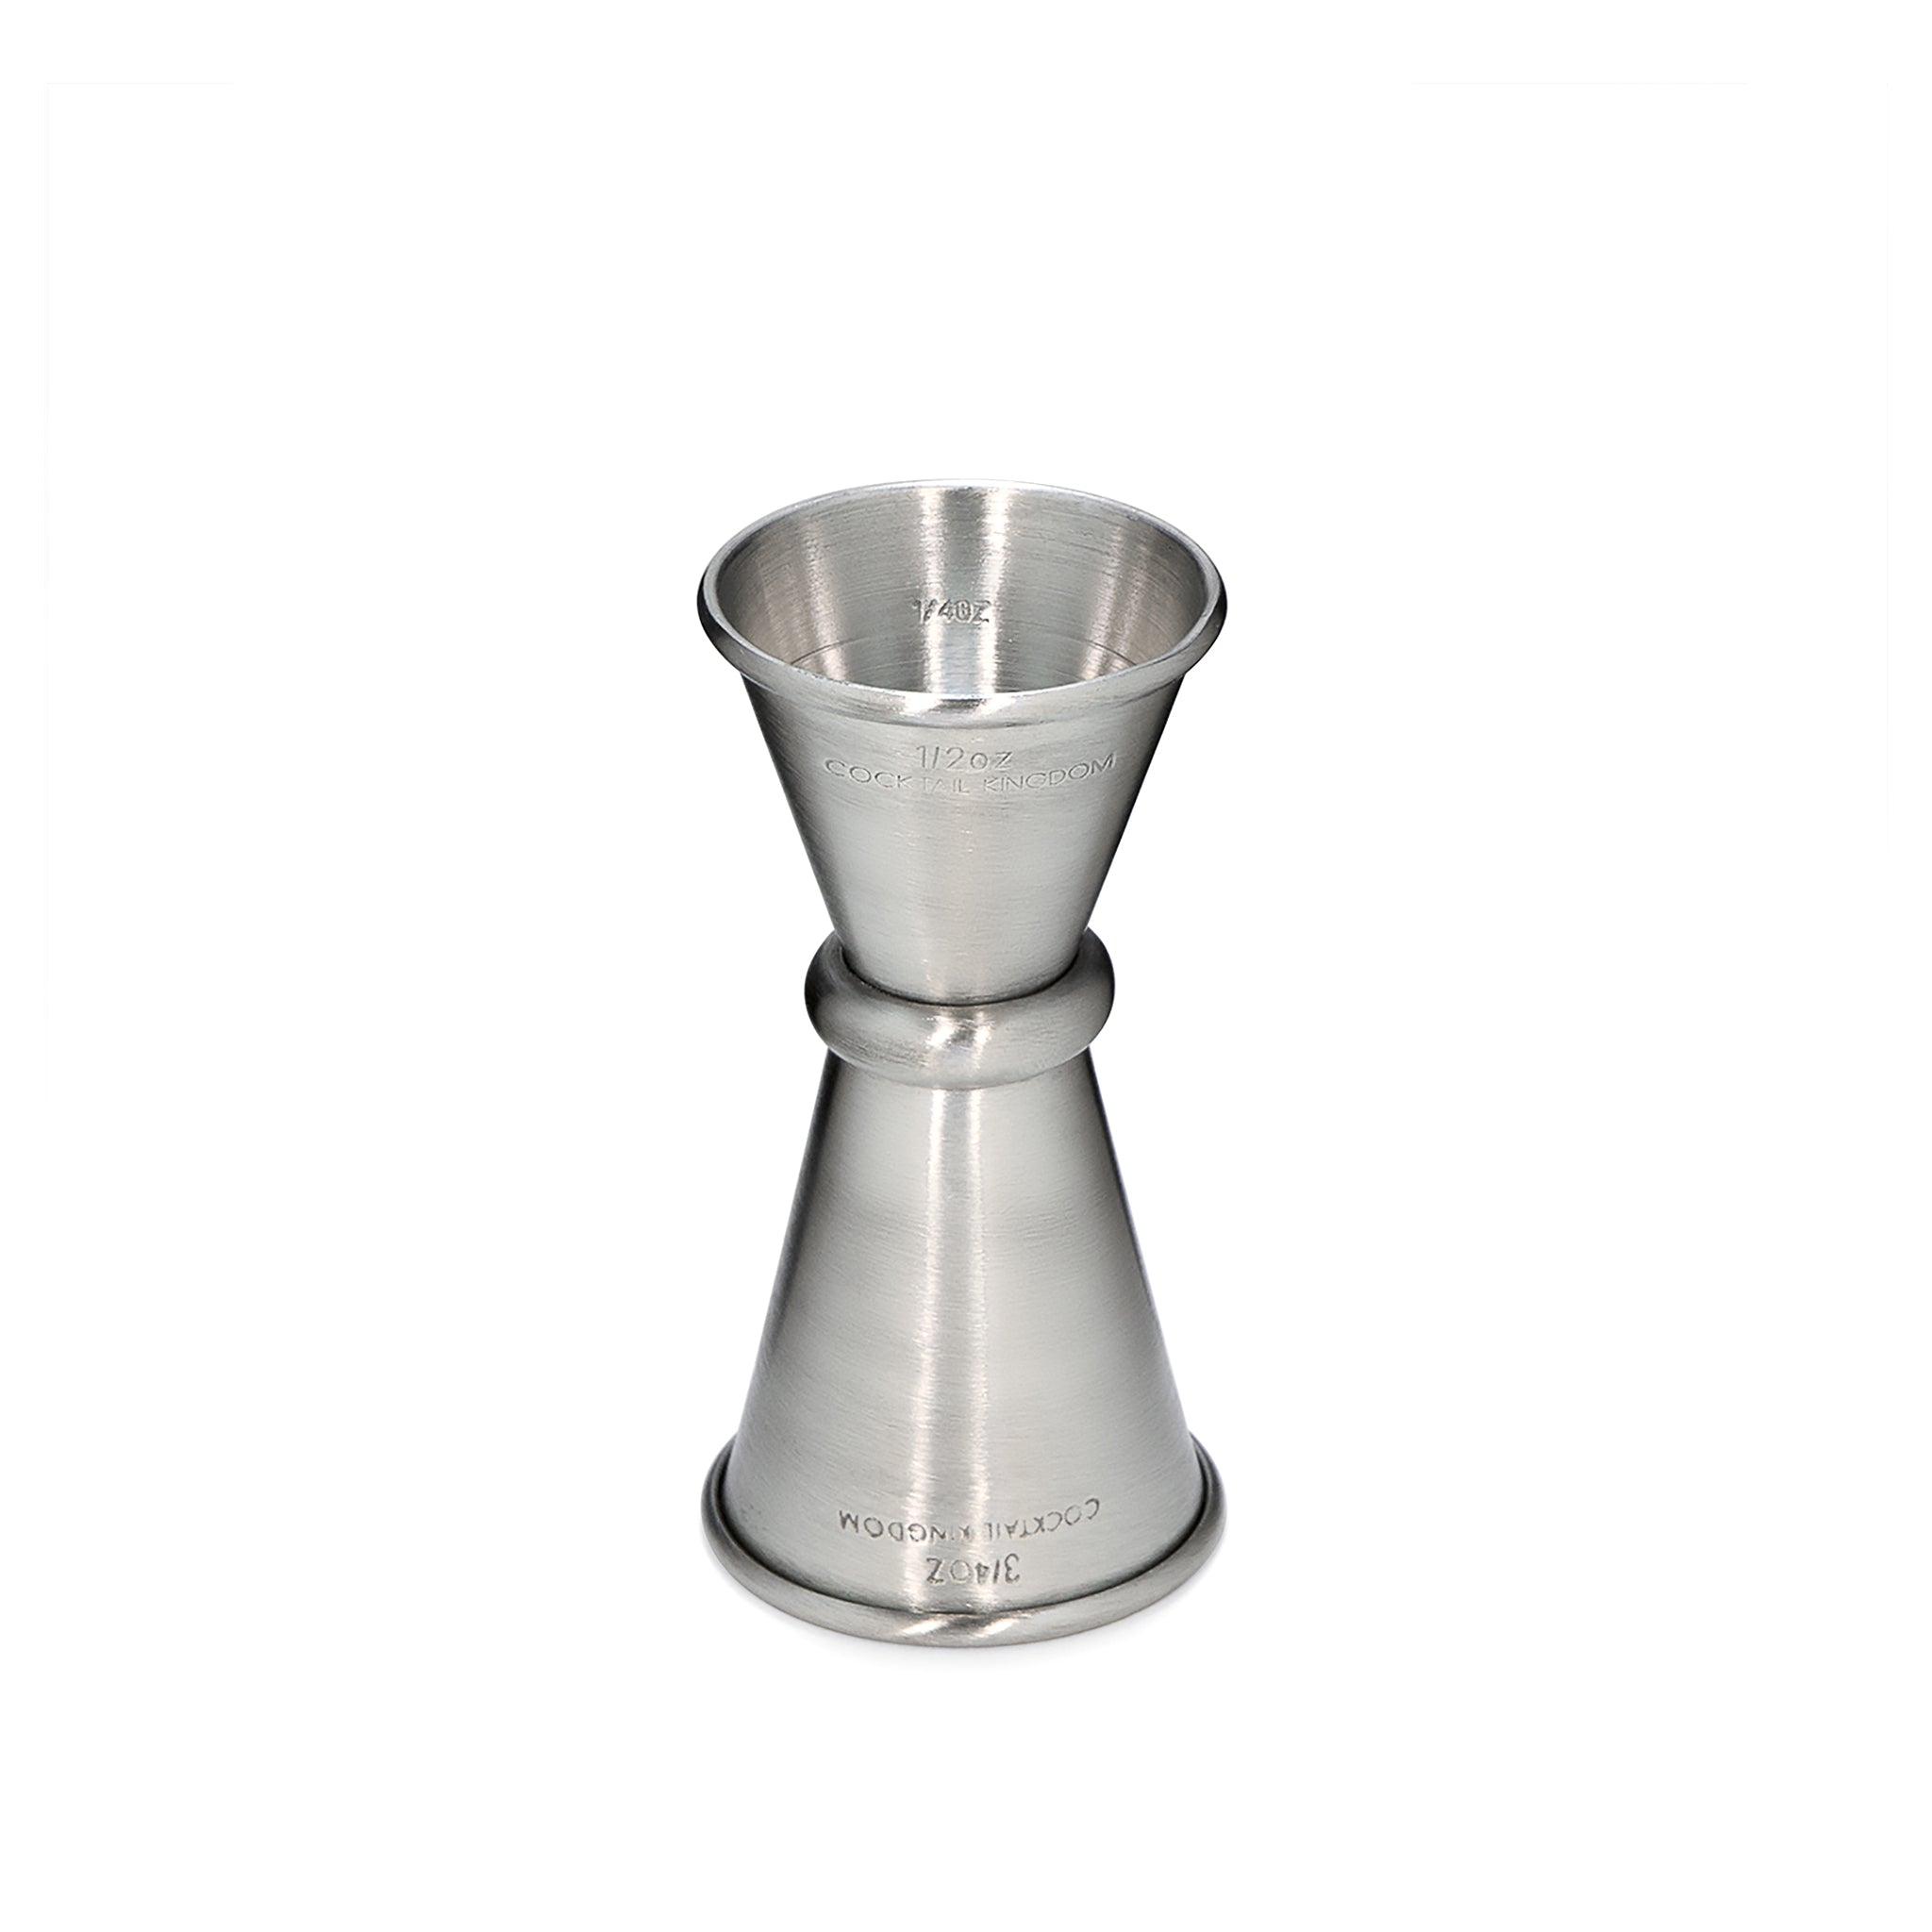 Franmara Product Number 8494 Japanese-style Stainless Steel Double jigger,  3/4 oz. - 1-1/2 oz.